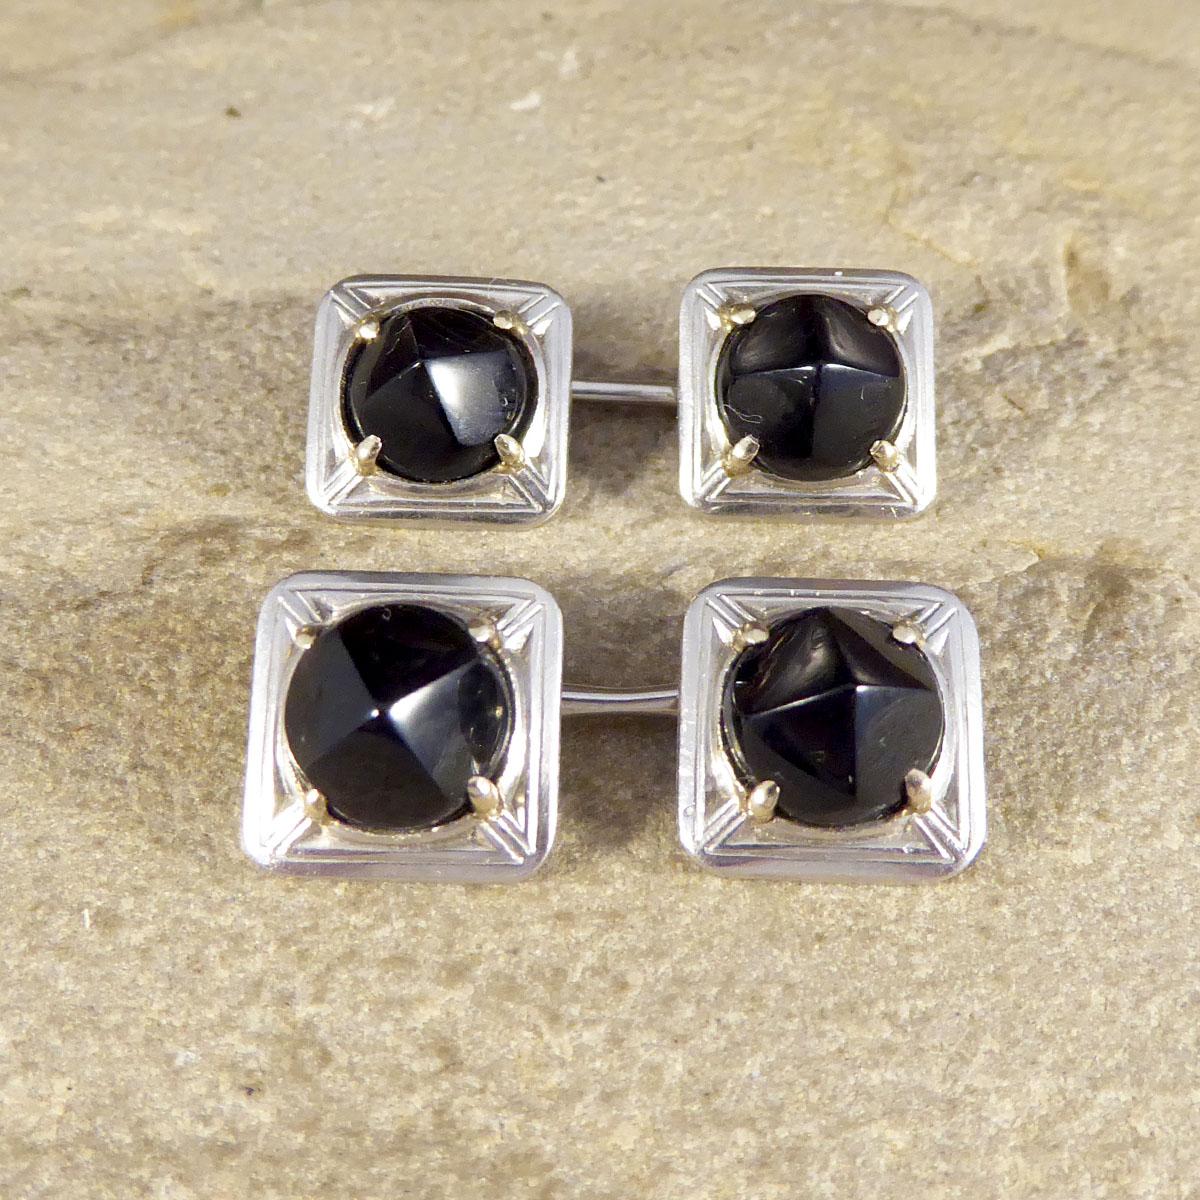 These Cufflinks have been hand crafted in the Art Deco era showing a square style and design. There are two Onyx stones reaching a curved point in each Cufflinks, set in a four claw White Gold setting. Each of the four Onyx stones are held into